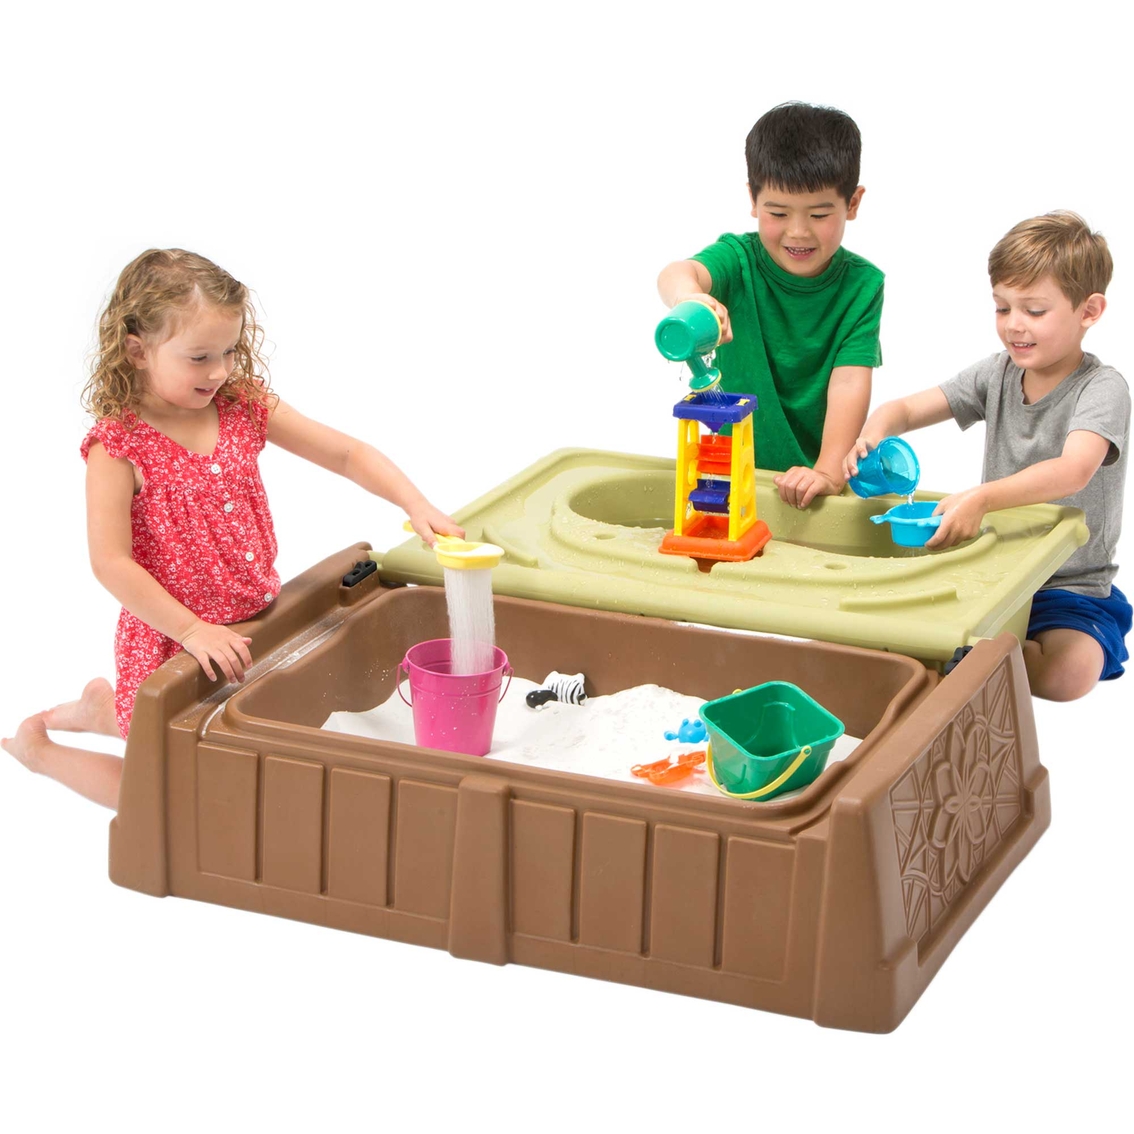 Simplay 3 Sand and Water Bench Toy - Image 5 of 6